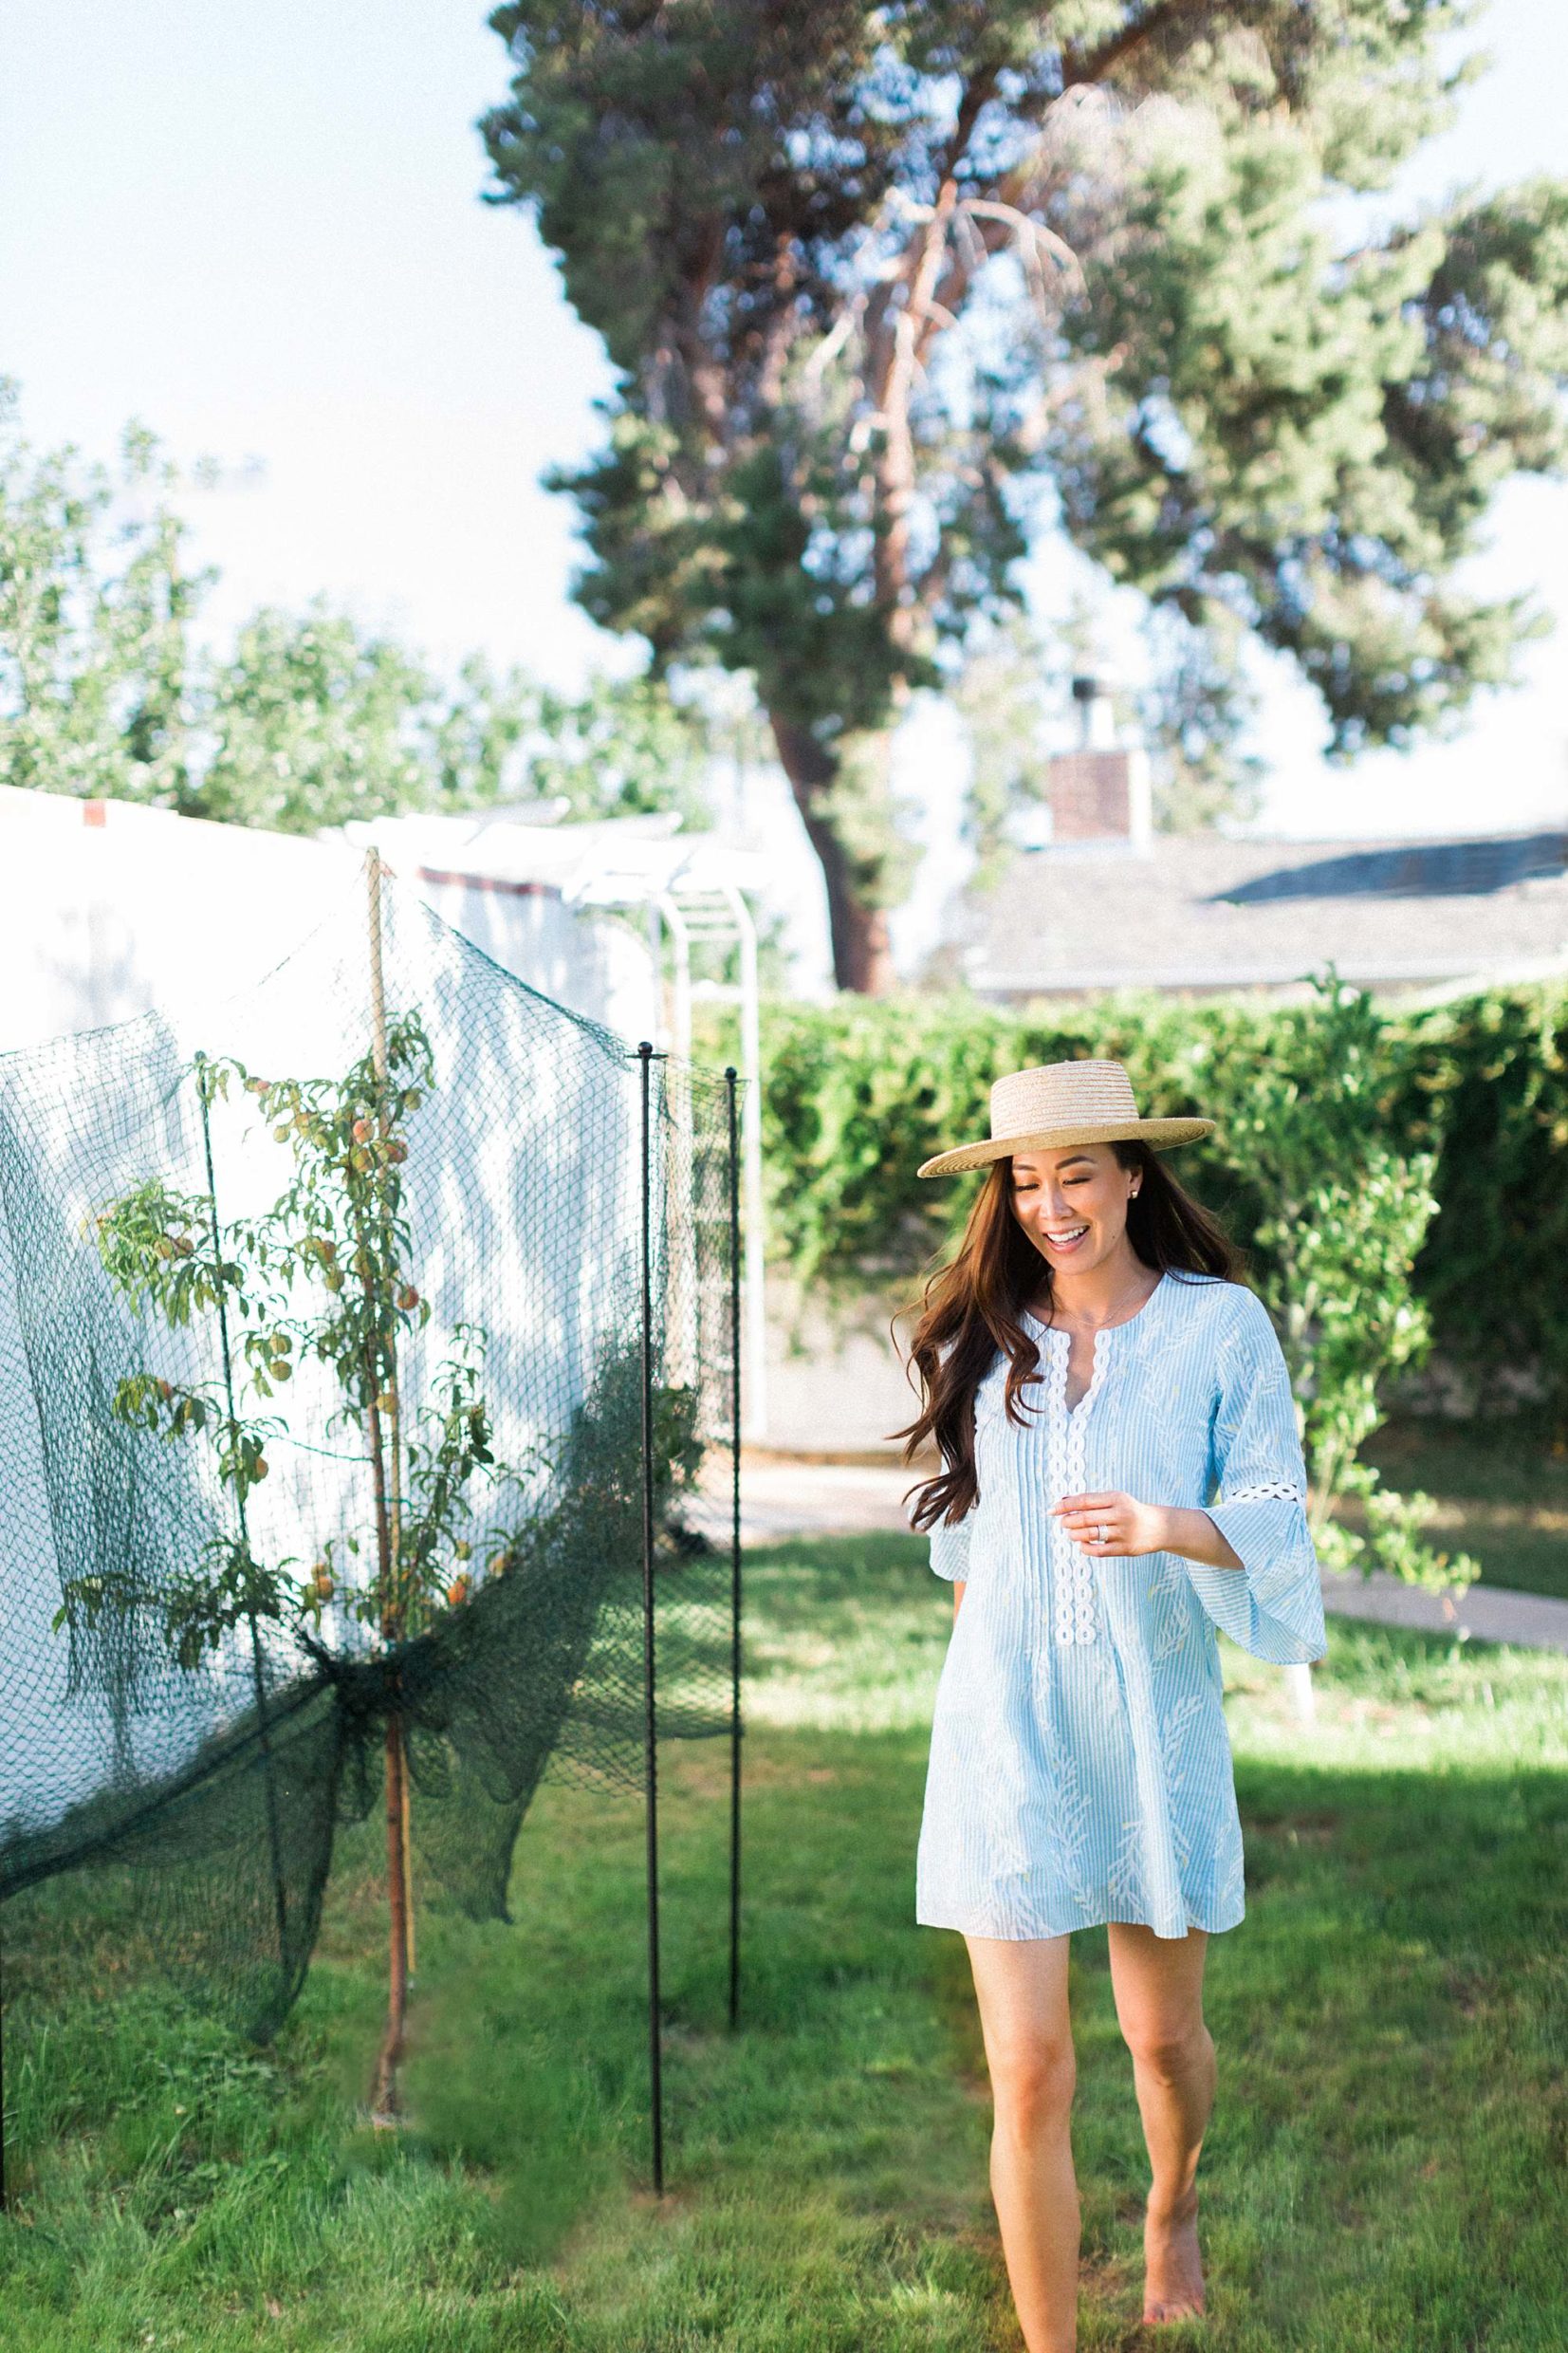 running through home backyard orchard peach tree barefoot in lightweight dress and straw hat